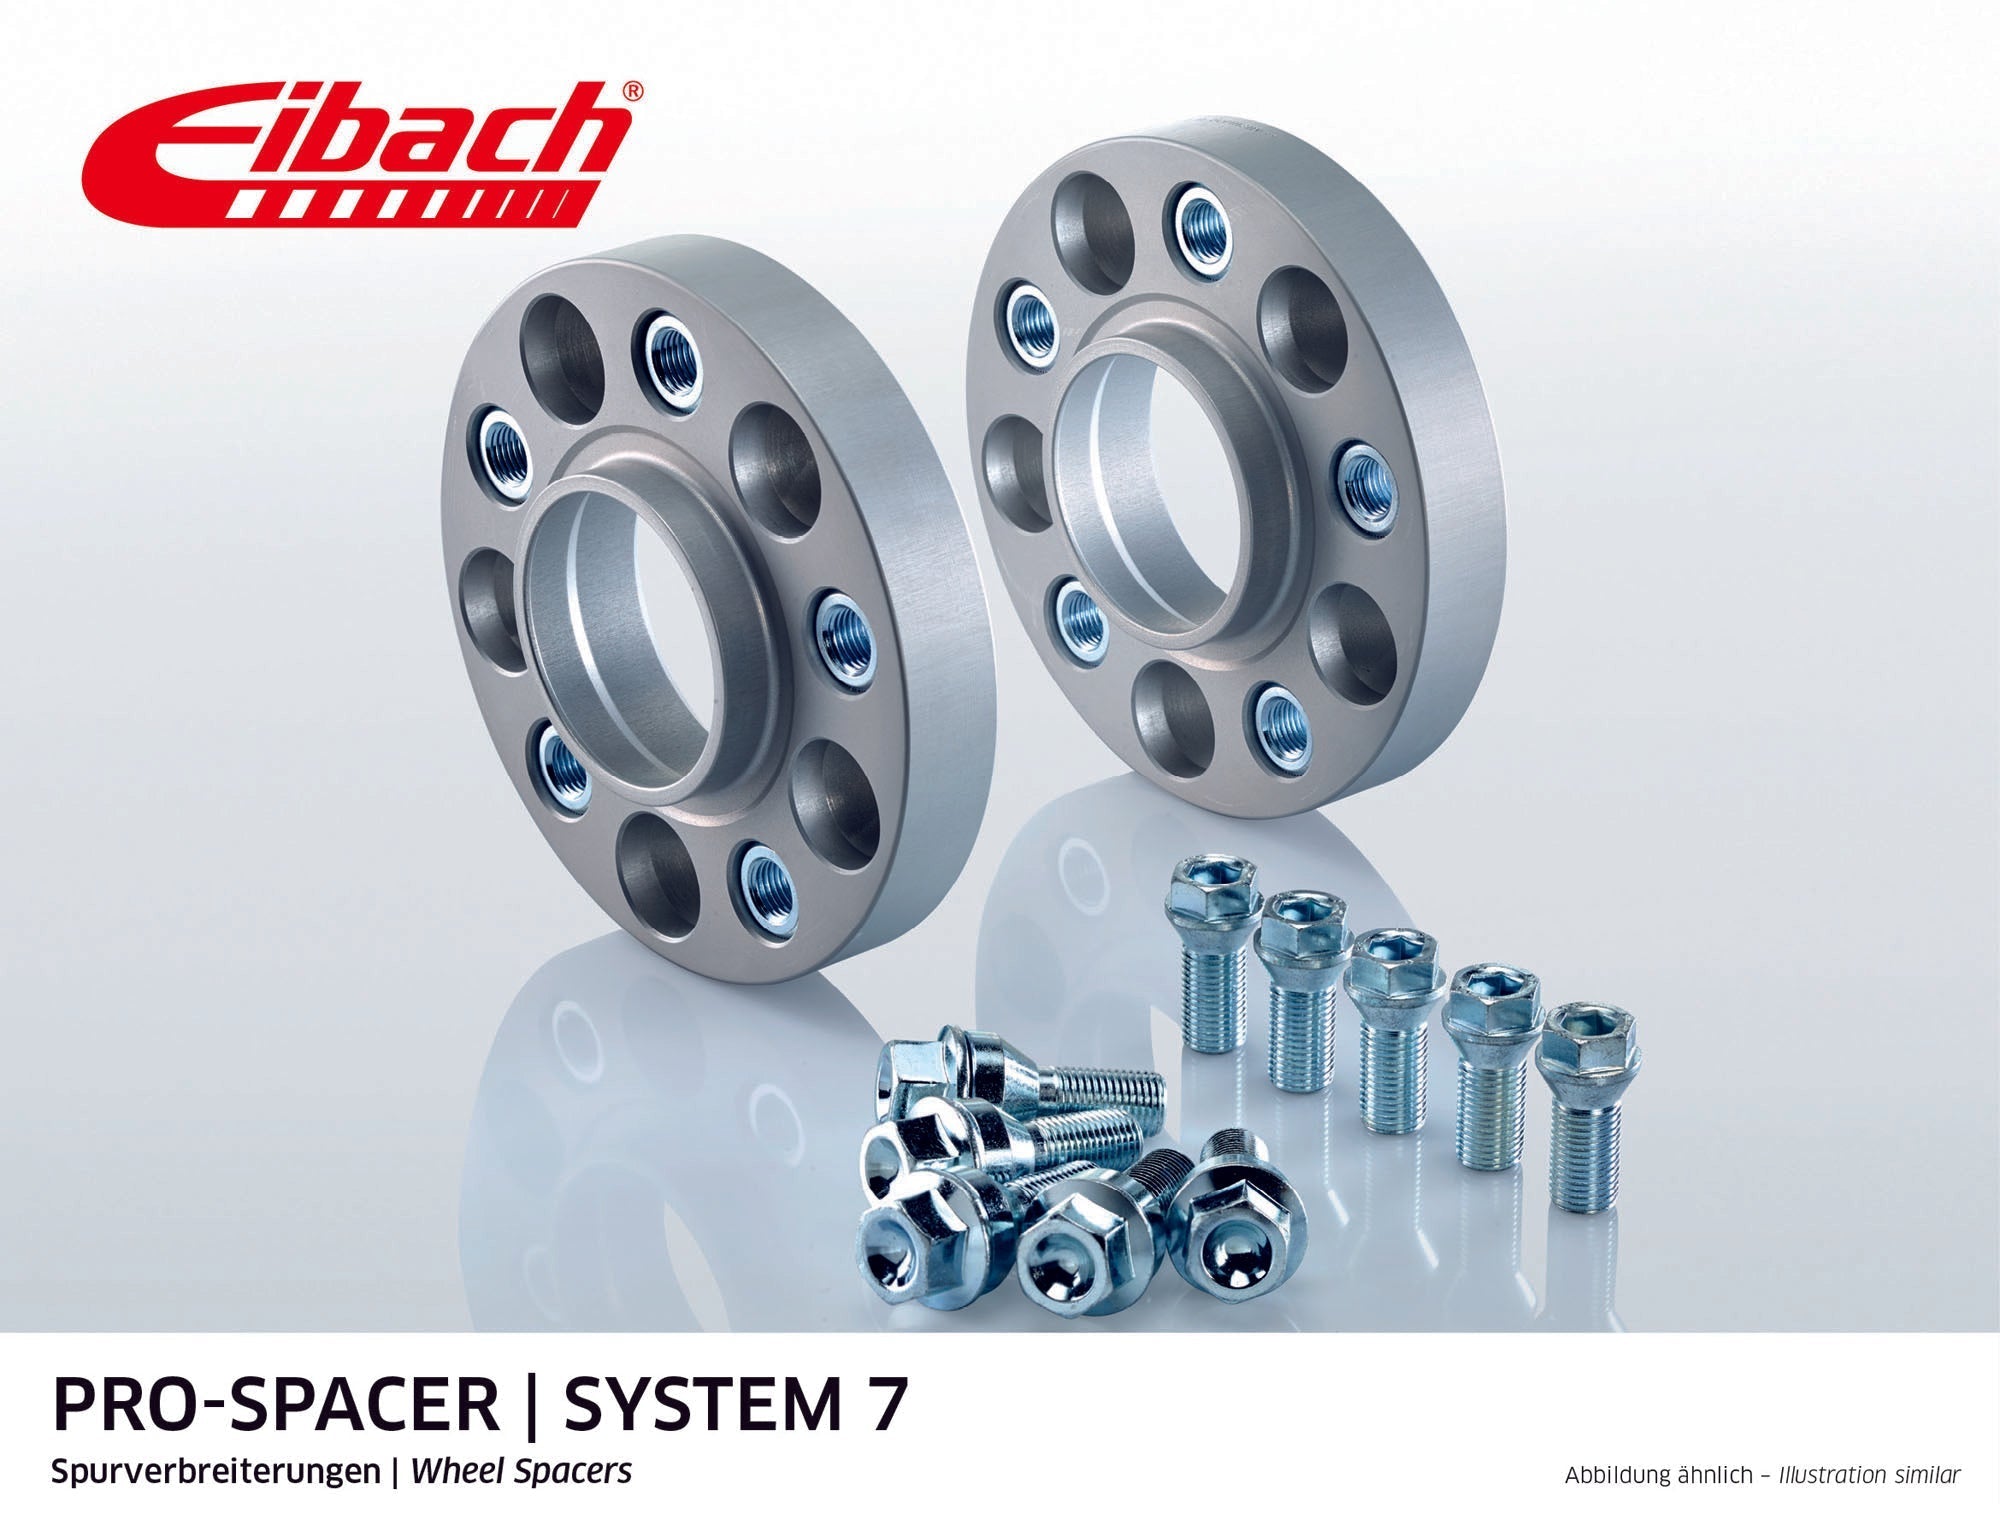 Eibach 21mm Pro-Spacer - Silver Anodized Wheel Spacer 911 1997-05 #S90-7-21-001